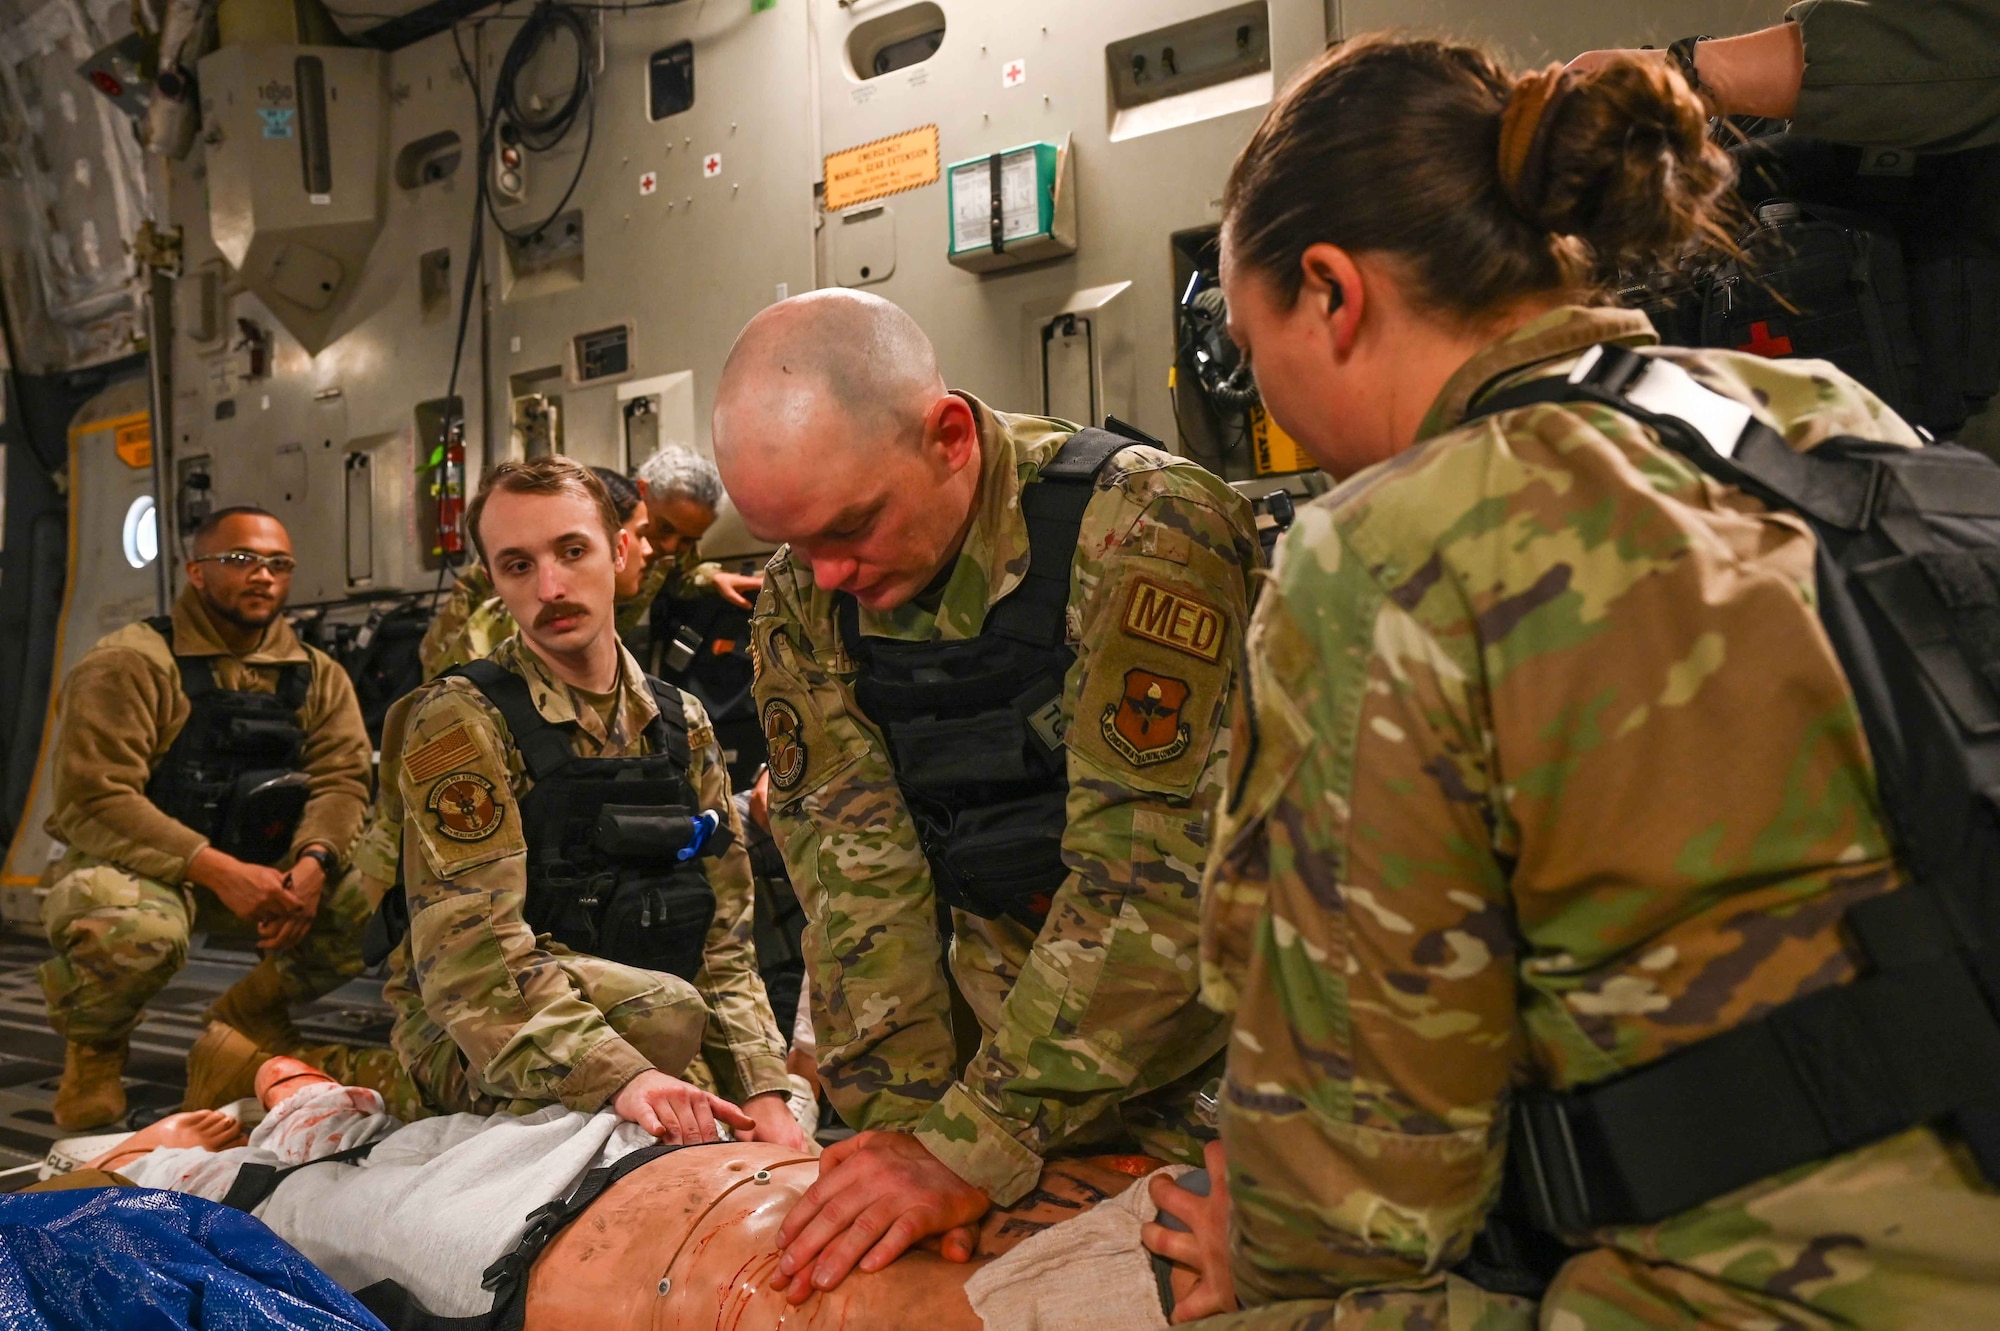 U.S. Air Force Technical Sgt. Robert Throne, 71st Medical Group (MDG) diagnostic and therapeutics flight chief, and Staff Sgt. Rebekah Clifford, 82nd MDG independent duty medical technician, perform first aid on a mannequin during the Caduceus Spear exercise on a C-17 Globemaster III from Altus Air Force Base, Oklahoma, Oct. 26, 2023. The team was tasked with giving life-saving medical care to patients throughout the flight from Clinton Sherman Airfield Park to the 97th Medical Group at Altus Air Force Base. (U.S. Air Force photo by Airman 1st Class Kari Degraffenreed)